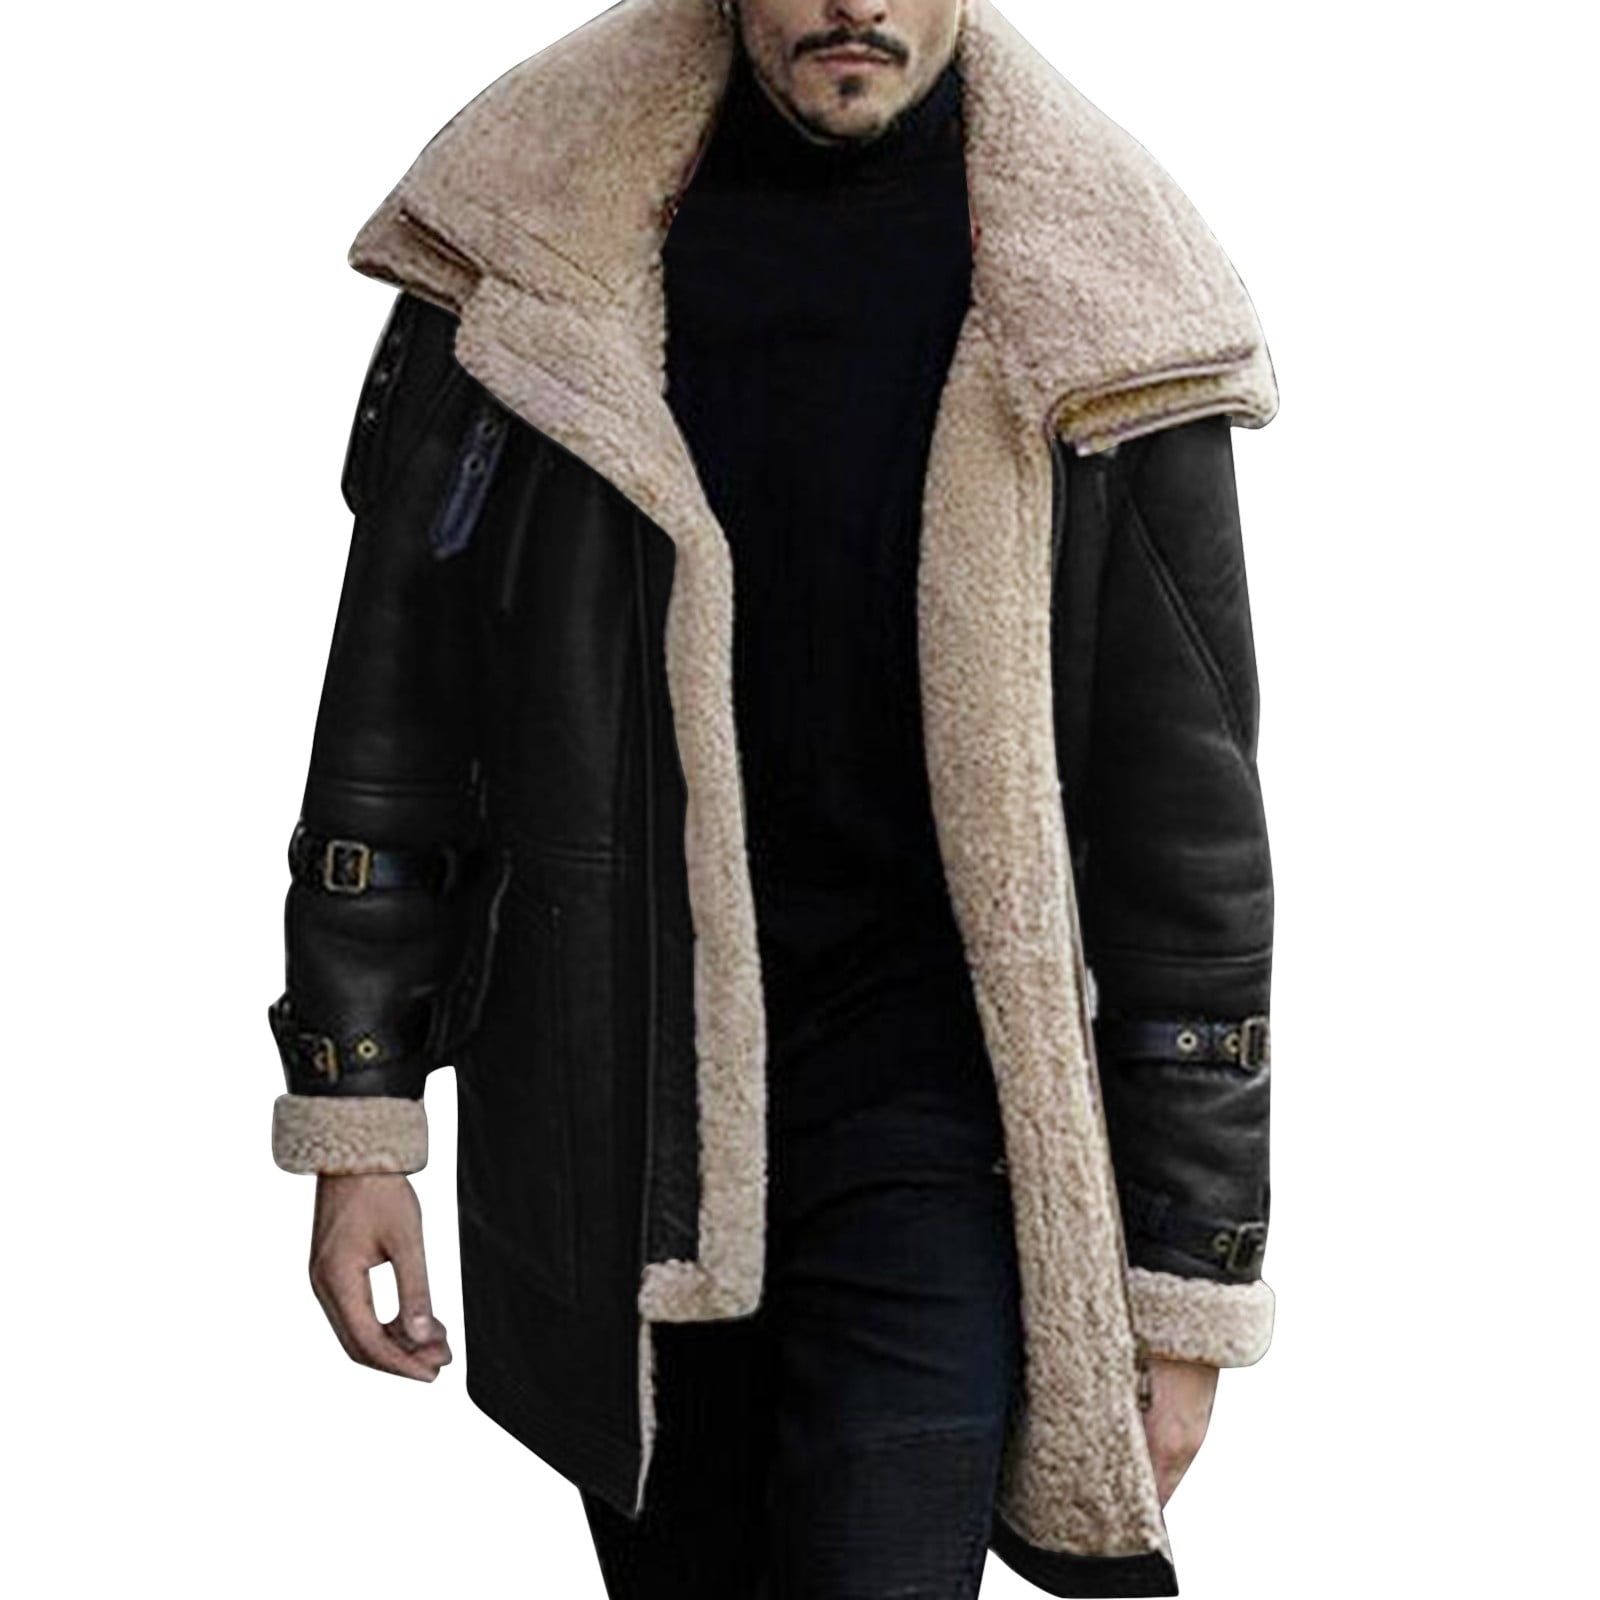 HSMQHJWE Bomber Jackets Cotton Canvas Jacket Men Autumn And Winter Plus  Size Winter Coat Lapel Collar Padded Leather Jacket Vintage Thicken Coat